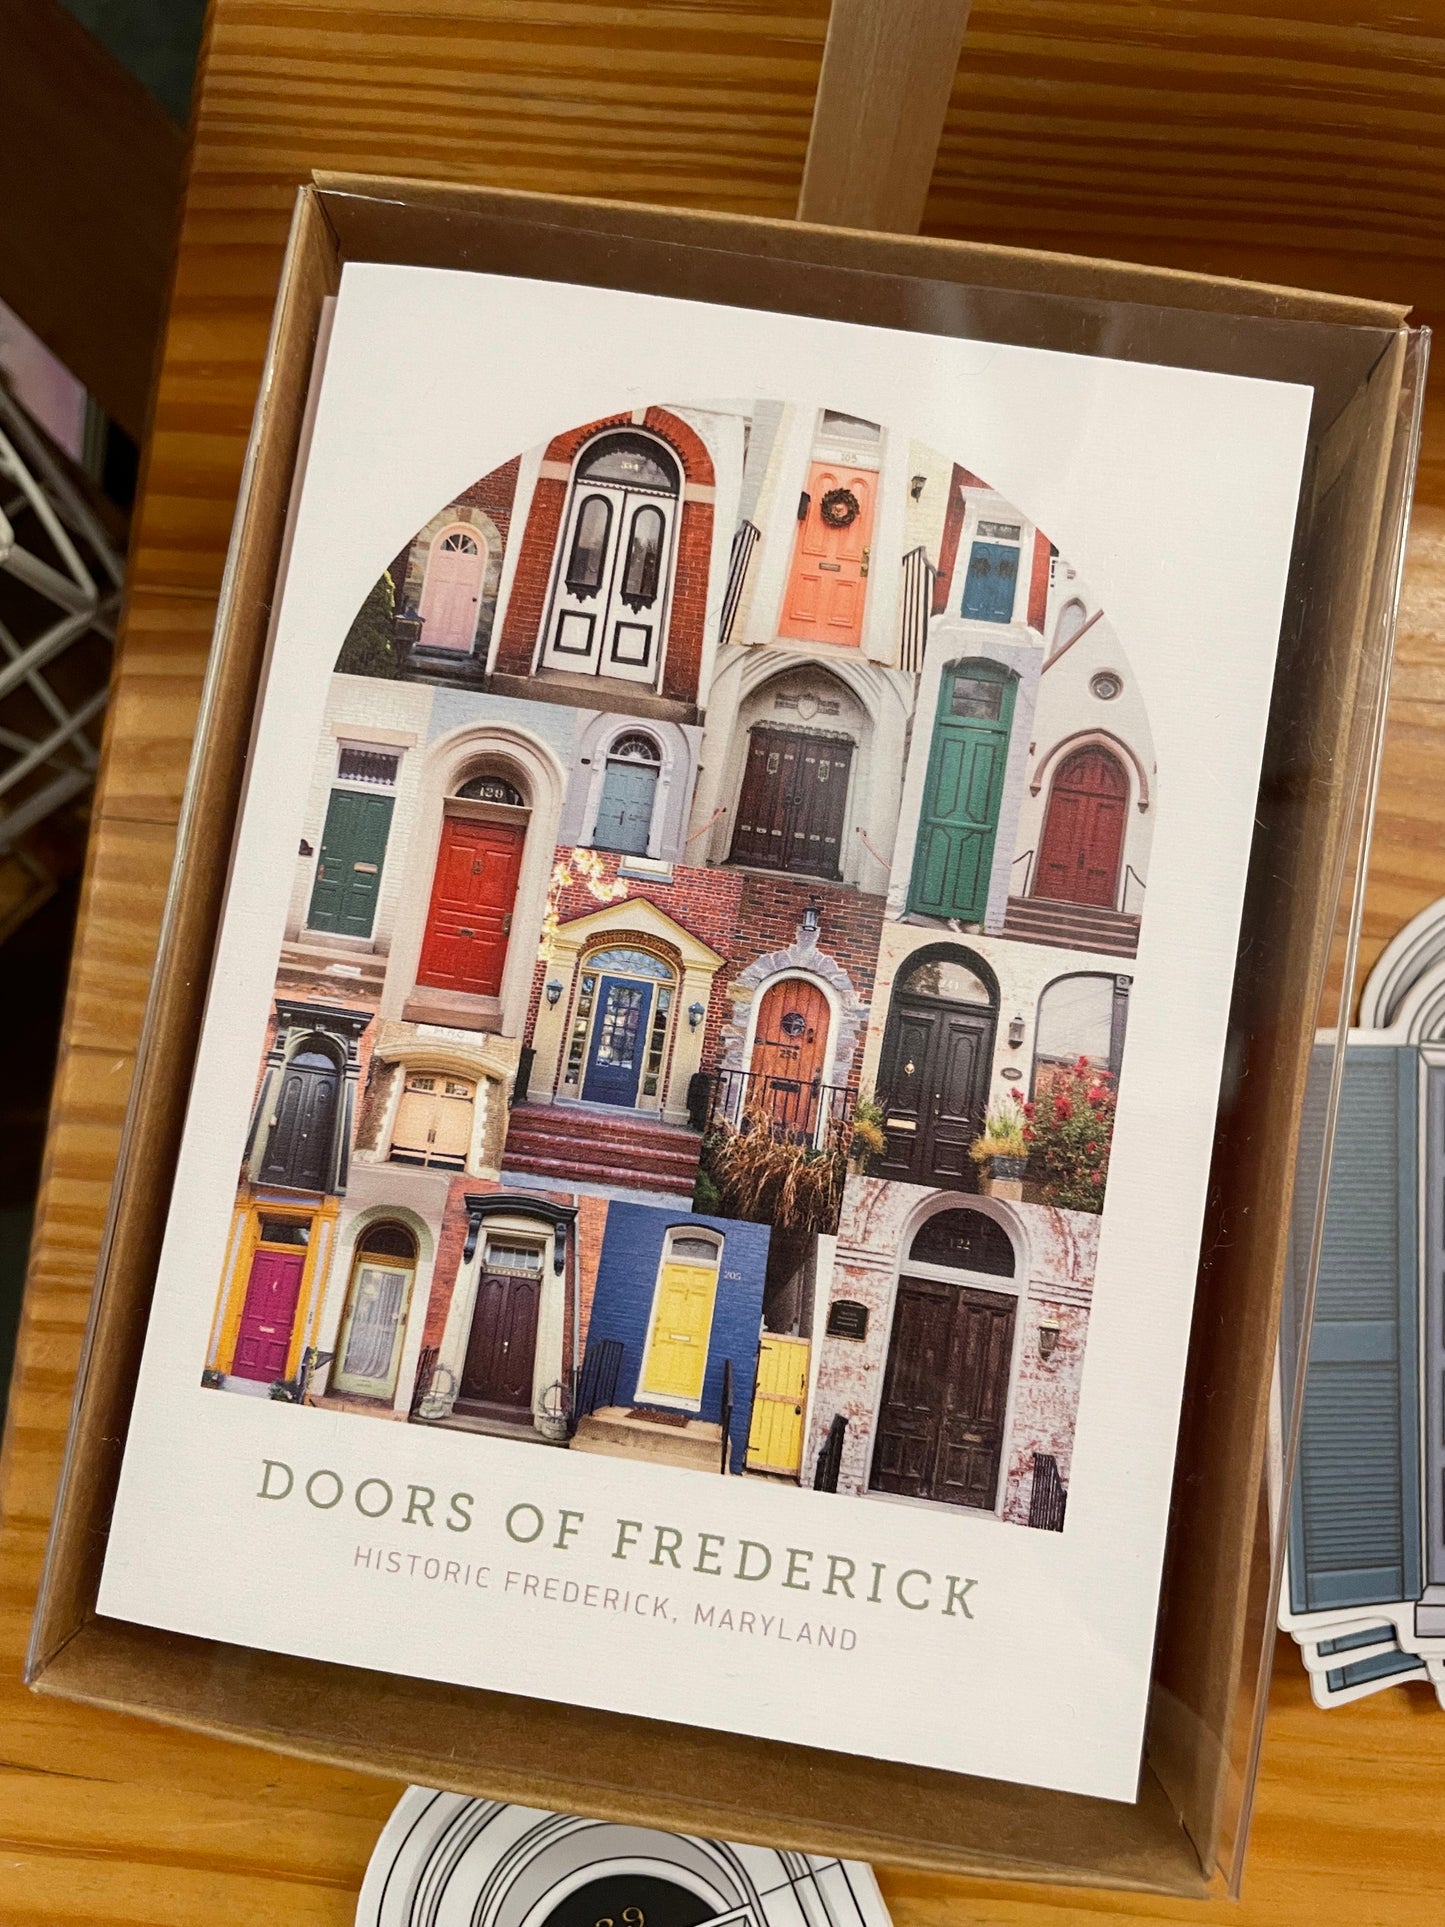 Doors of Frederick Greeting Cards